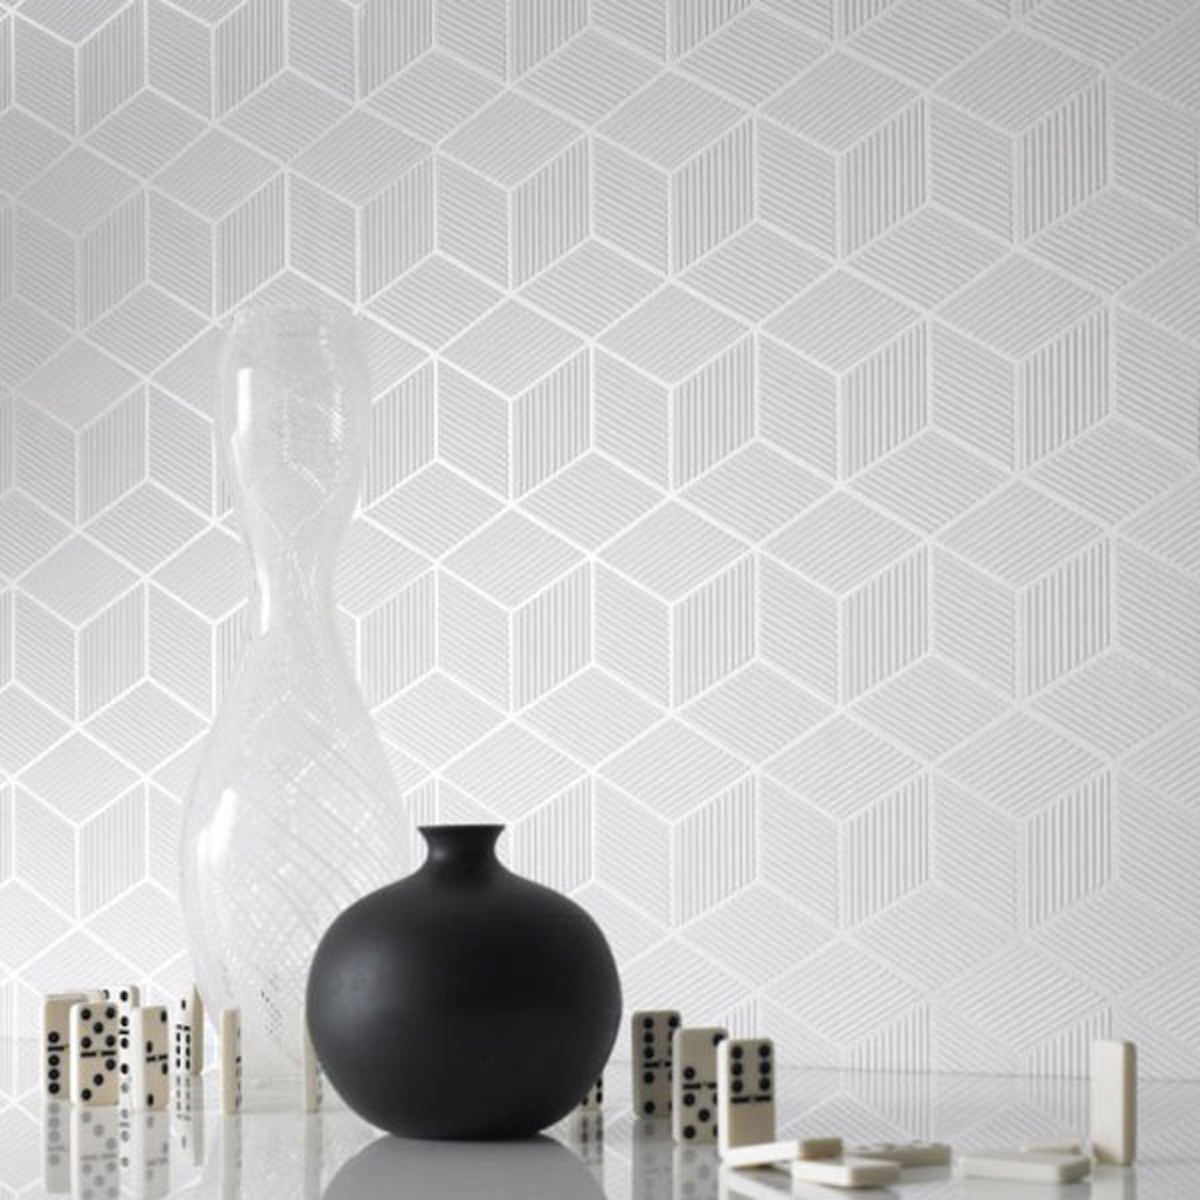  Exclusive Inspiring Black and White Wallpaper Designs with 3D Layouts 1200x1200